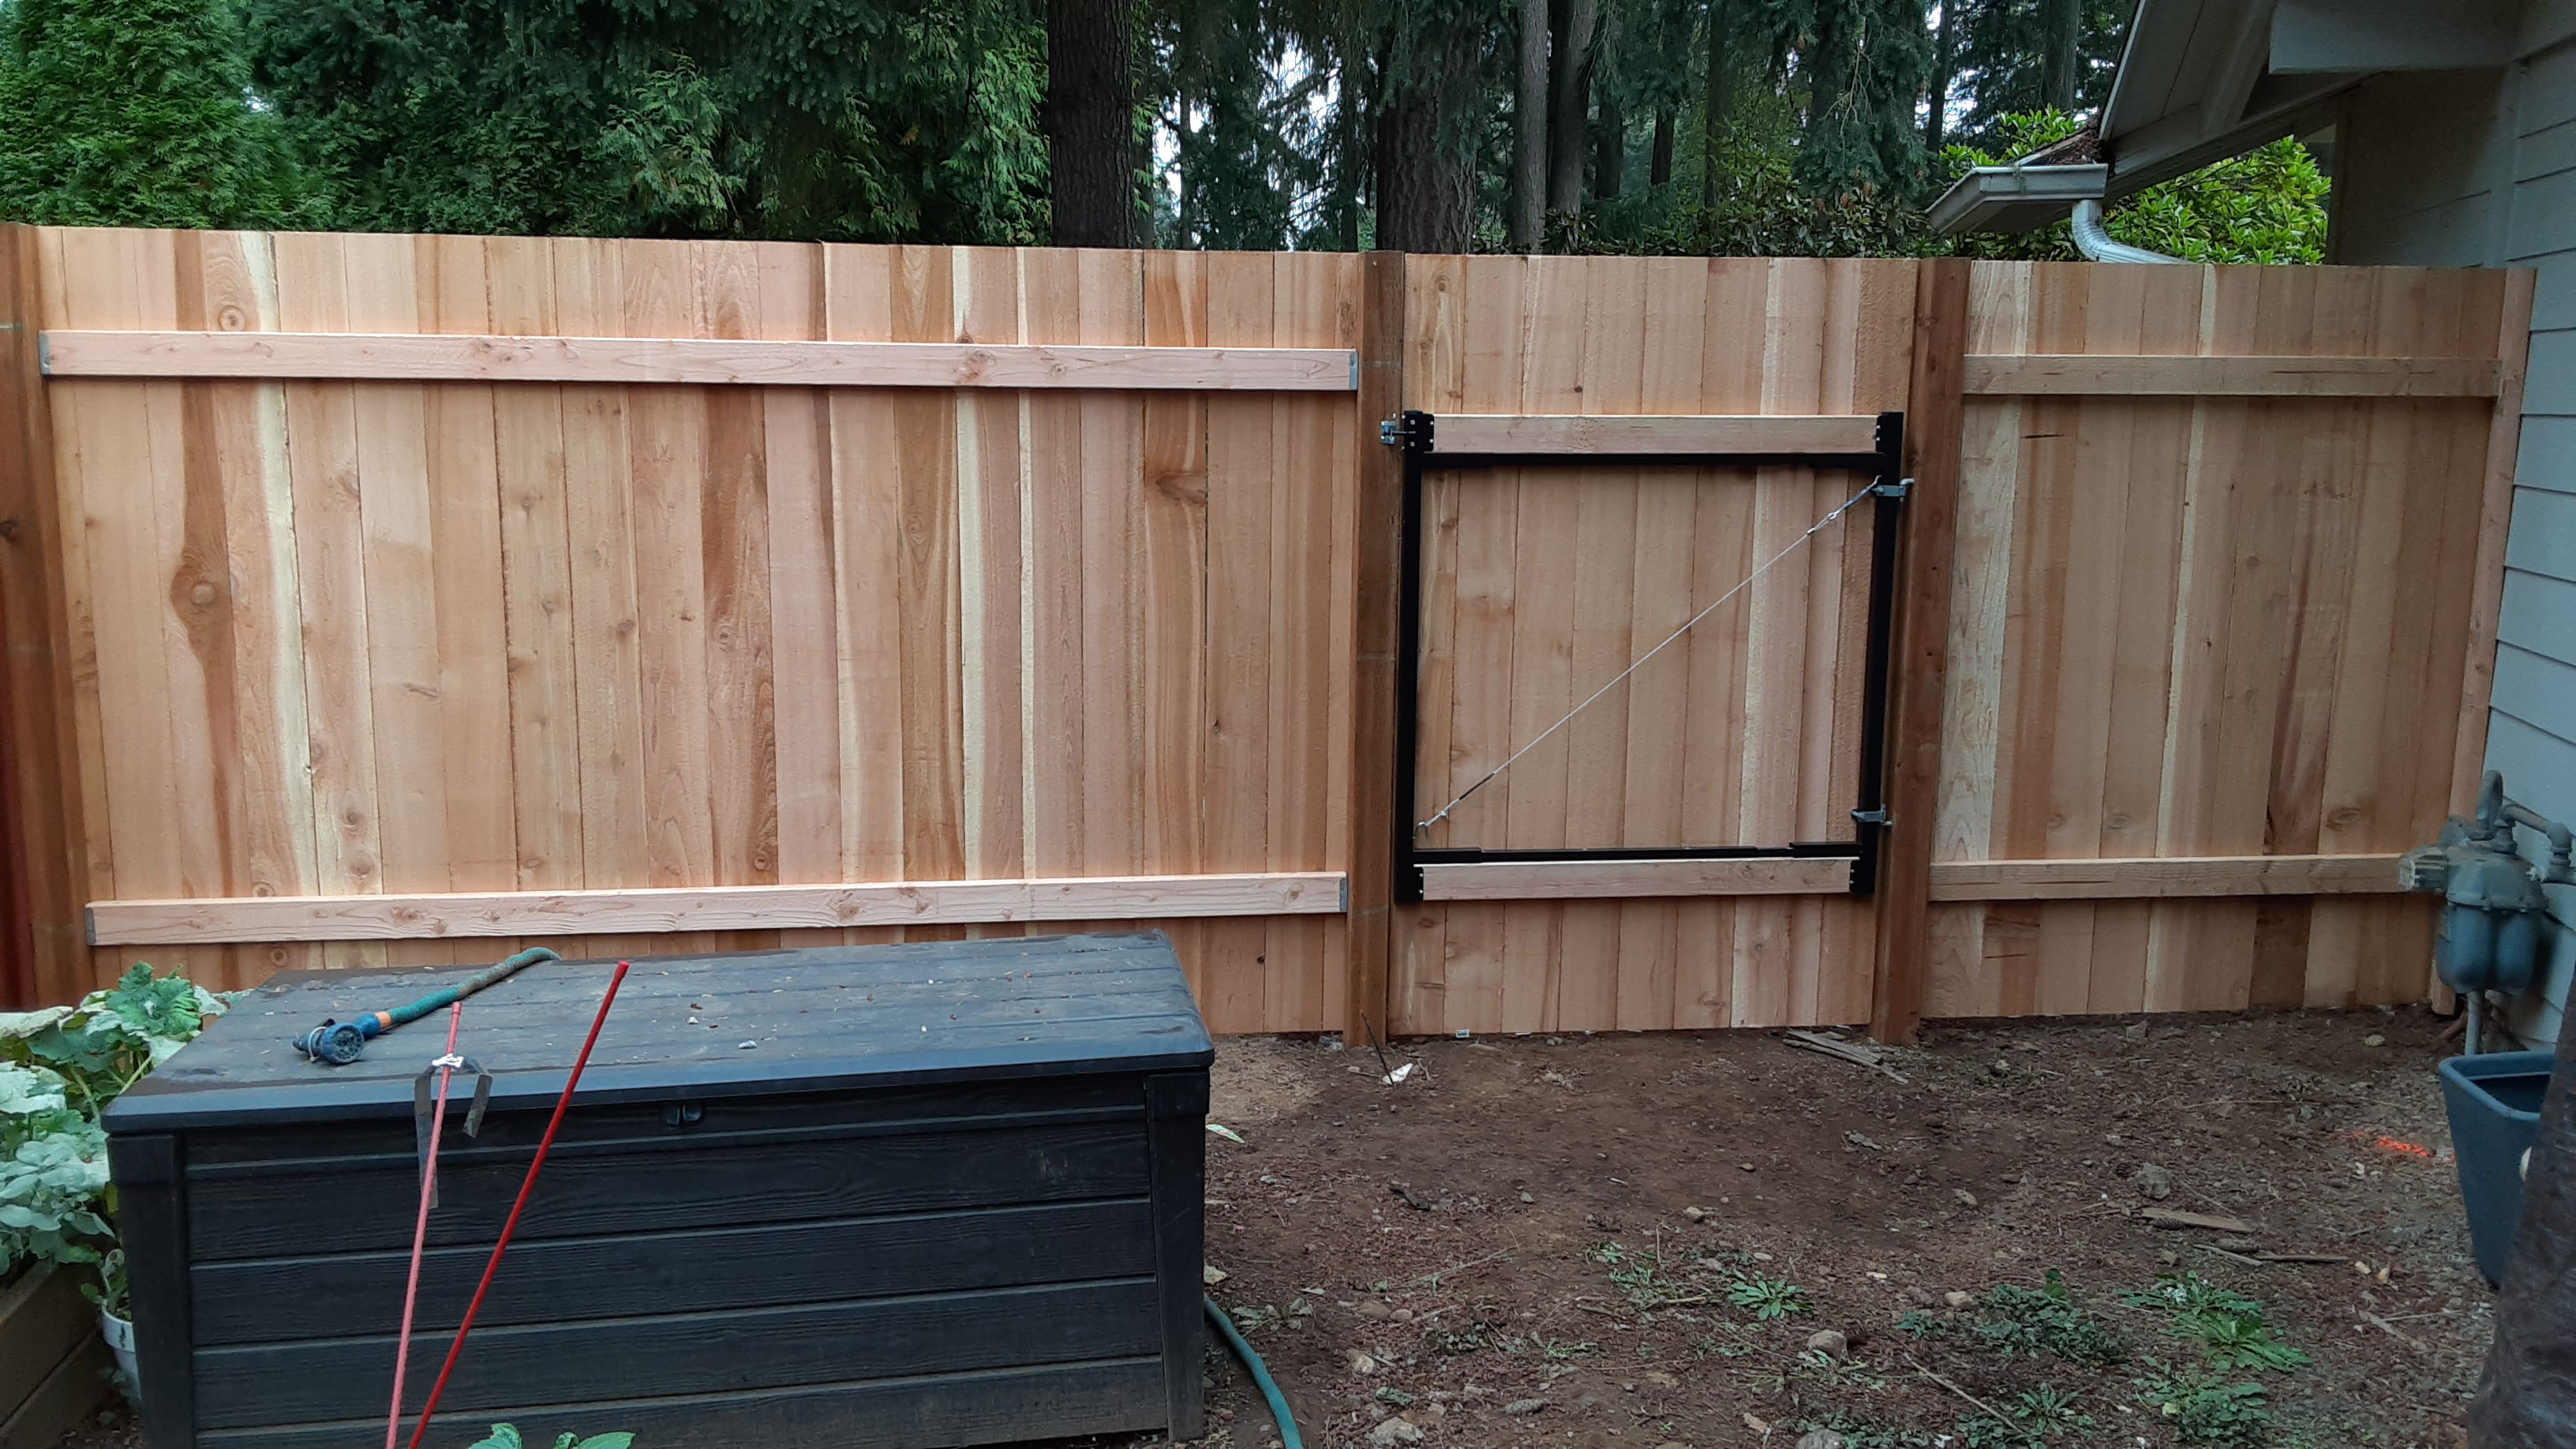 Remodeled wood fence with wood posts and new wood fence gate